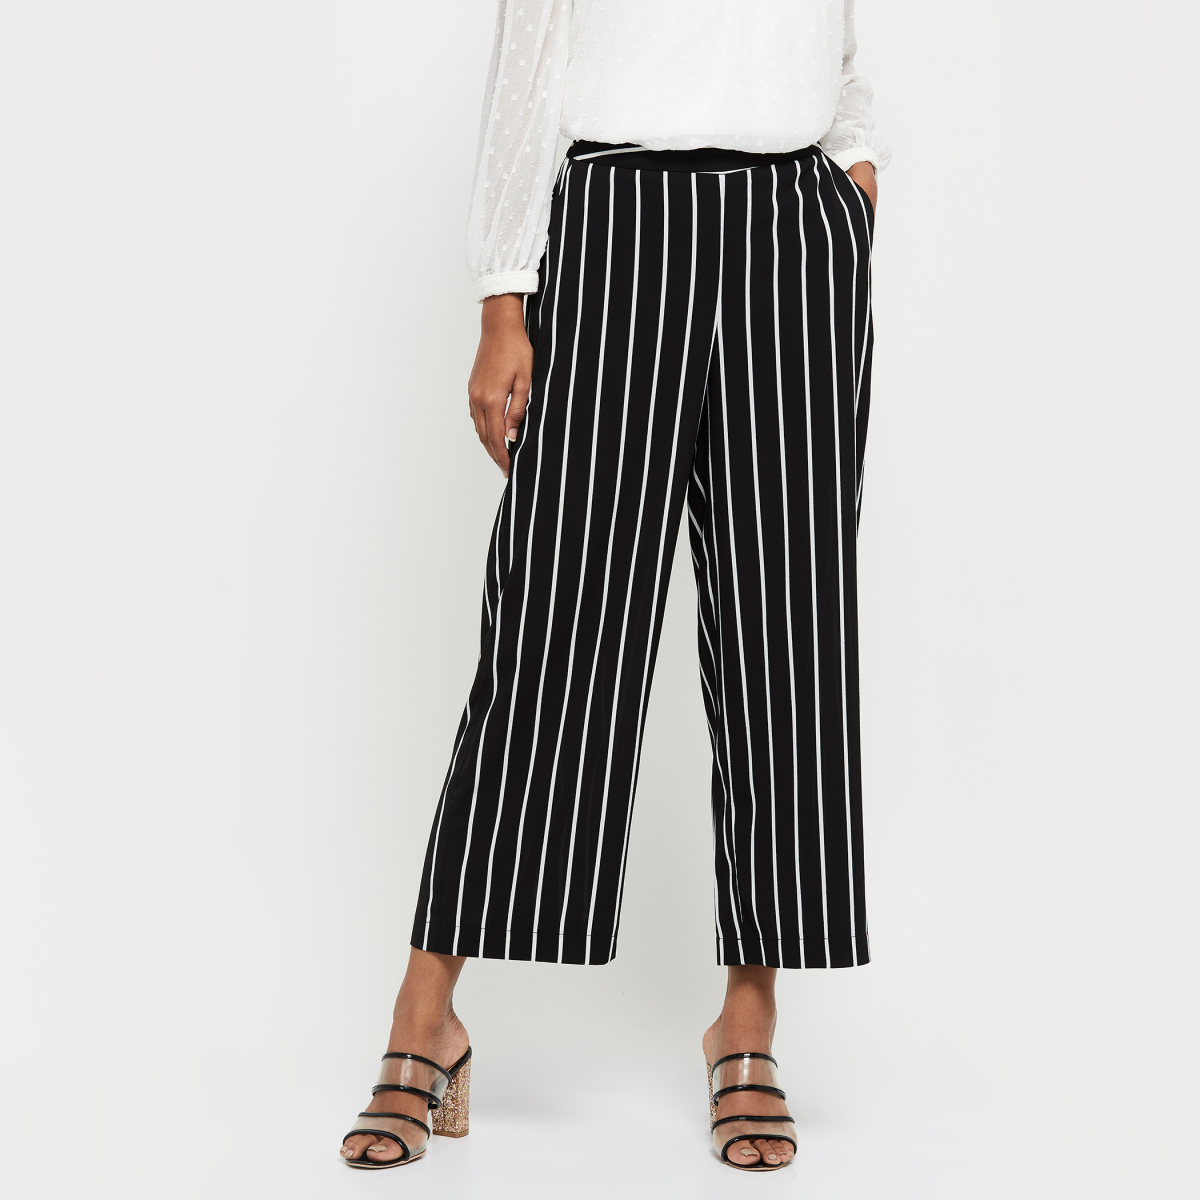 SweatyRocks Women's Striped Extra Long High Waited Wide Leg Pants Loose  Casual Trousers with Pockets Black White XS at Amazon Women's Clothing store